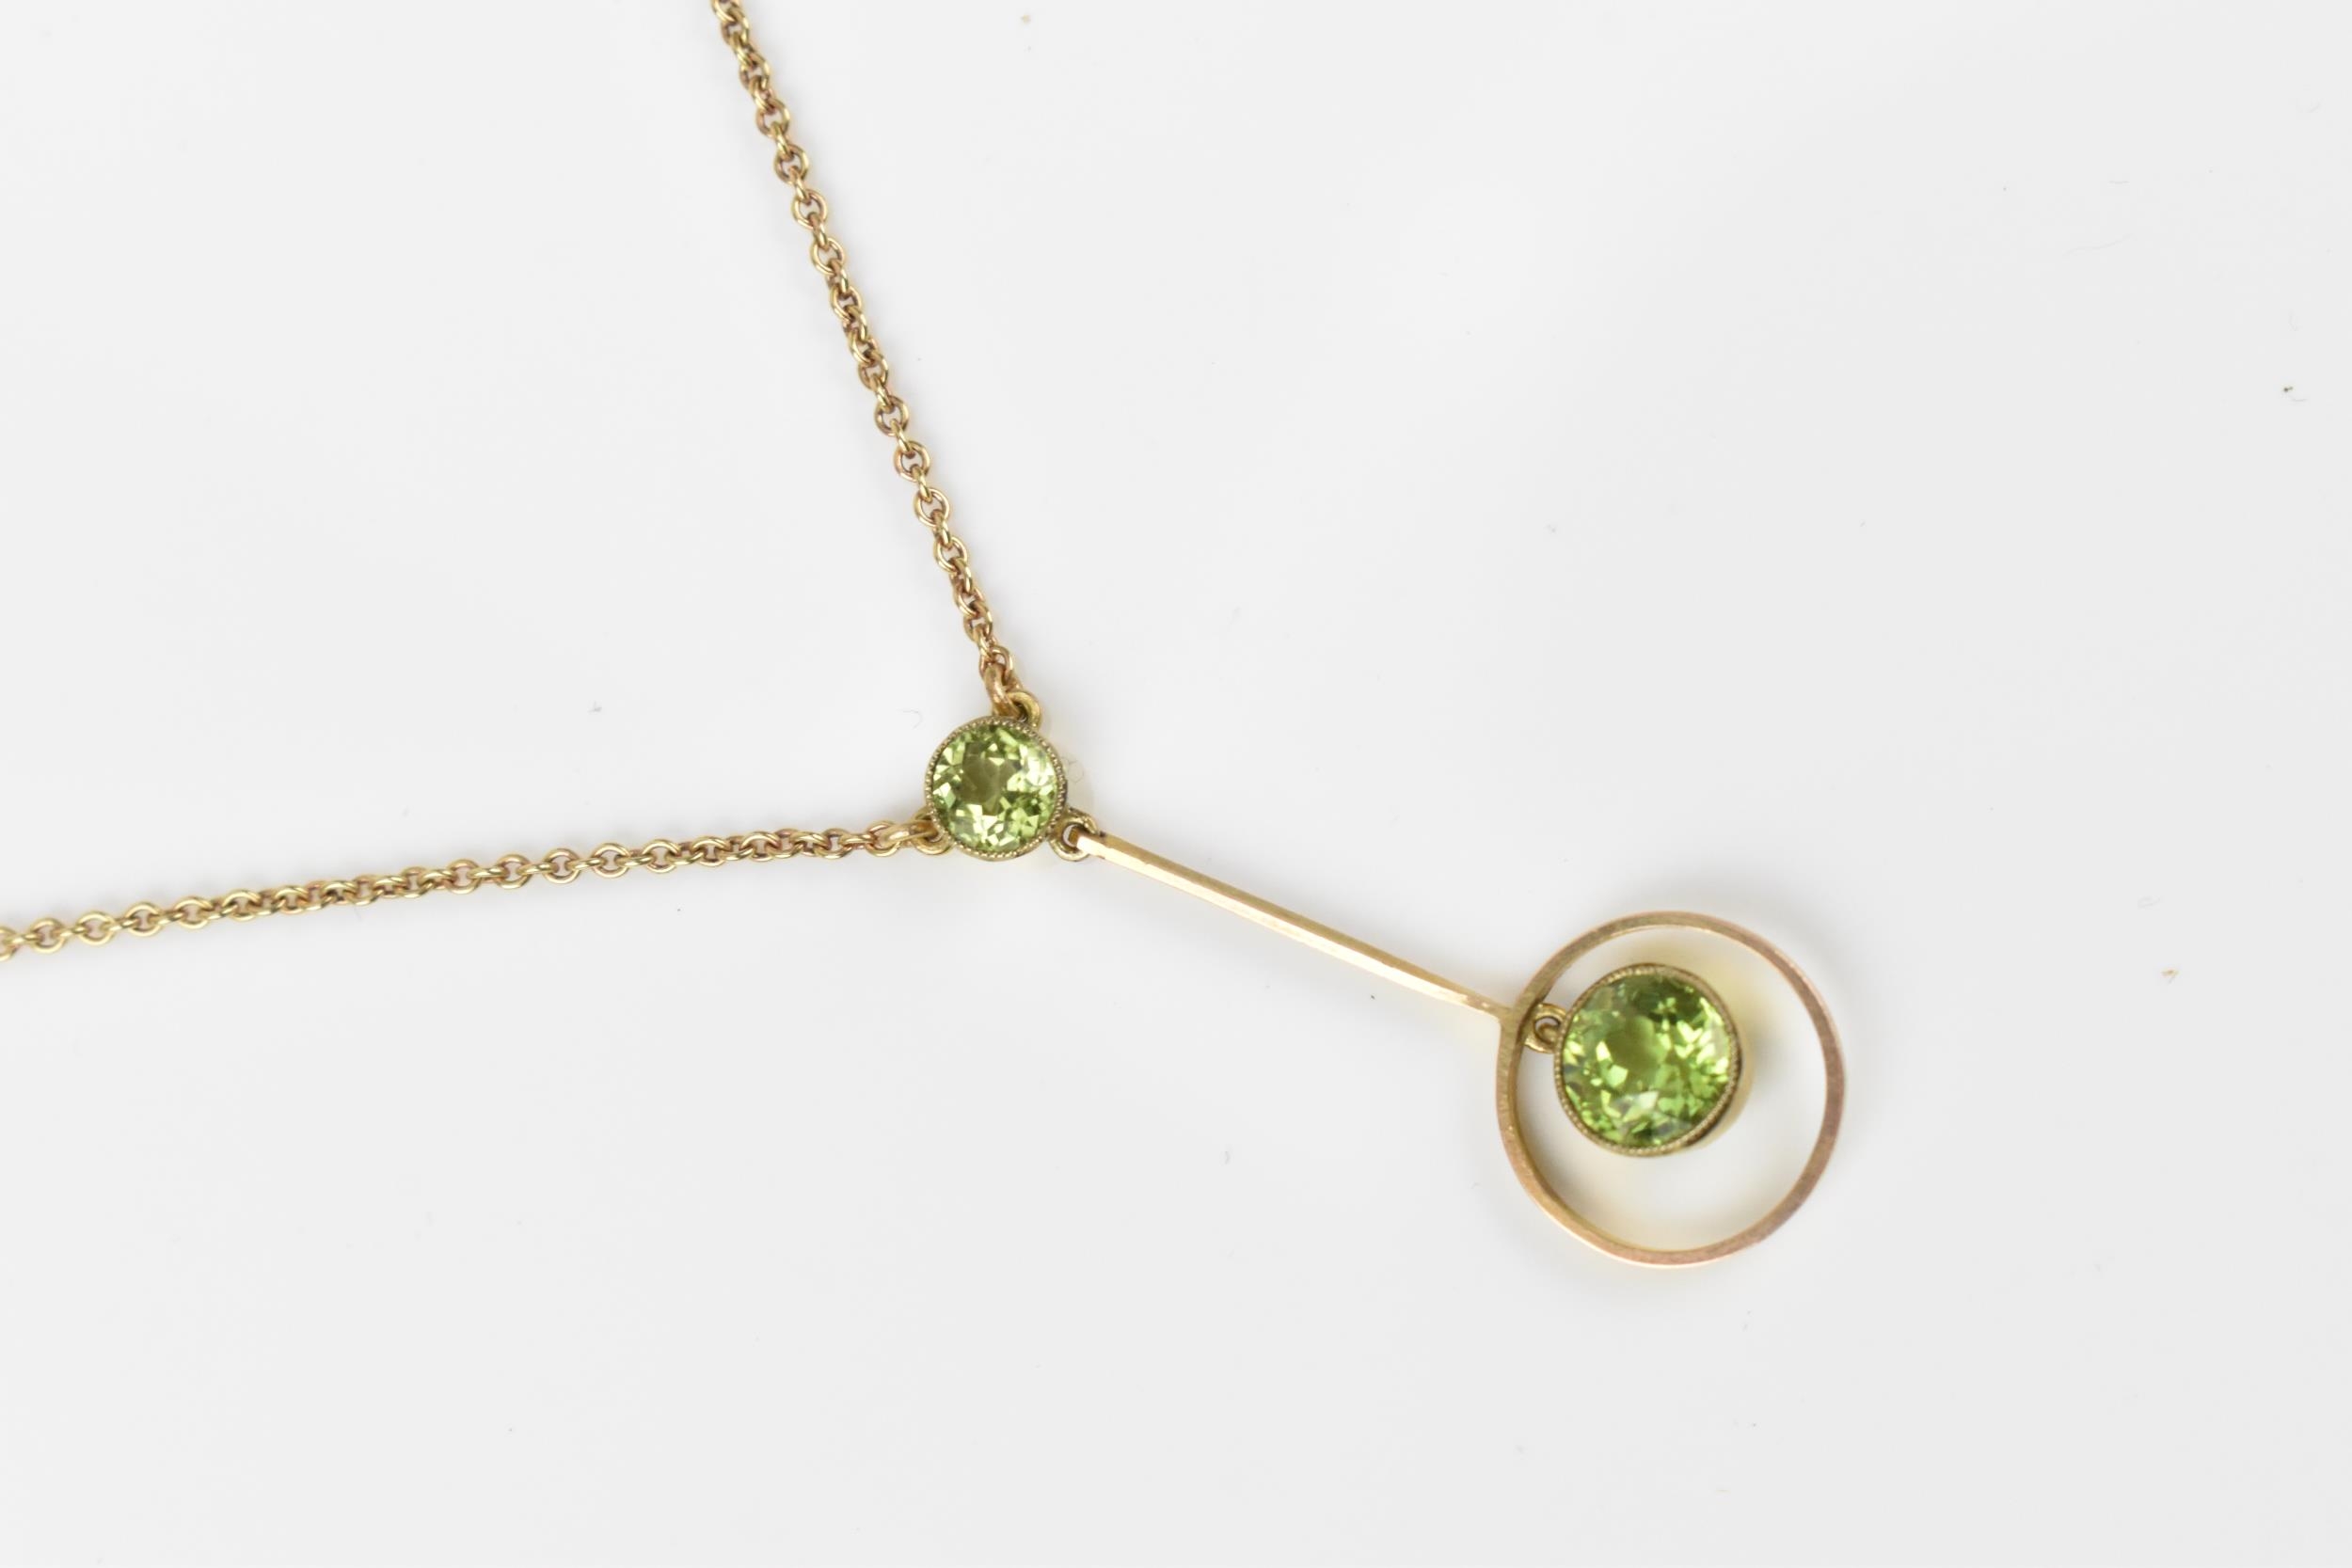 An early 20th century 9ct yellow gold and peridot necklace, the cable link chain with central - Image 2 of 3